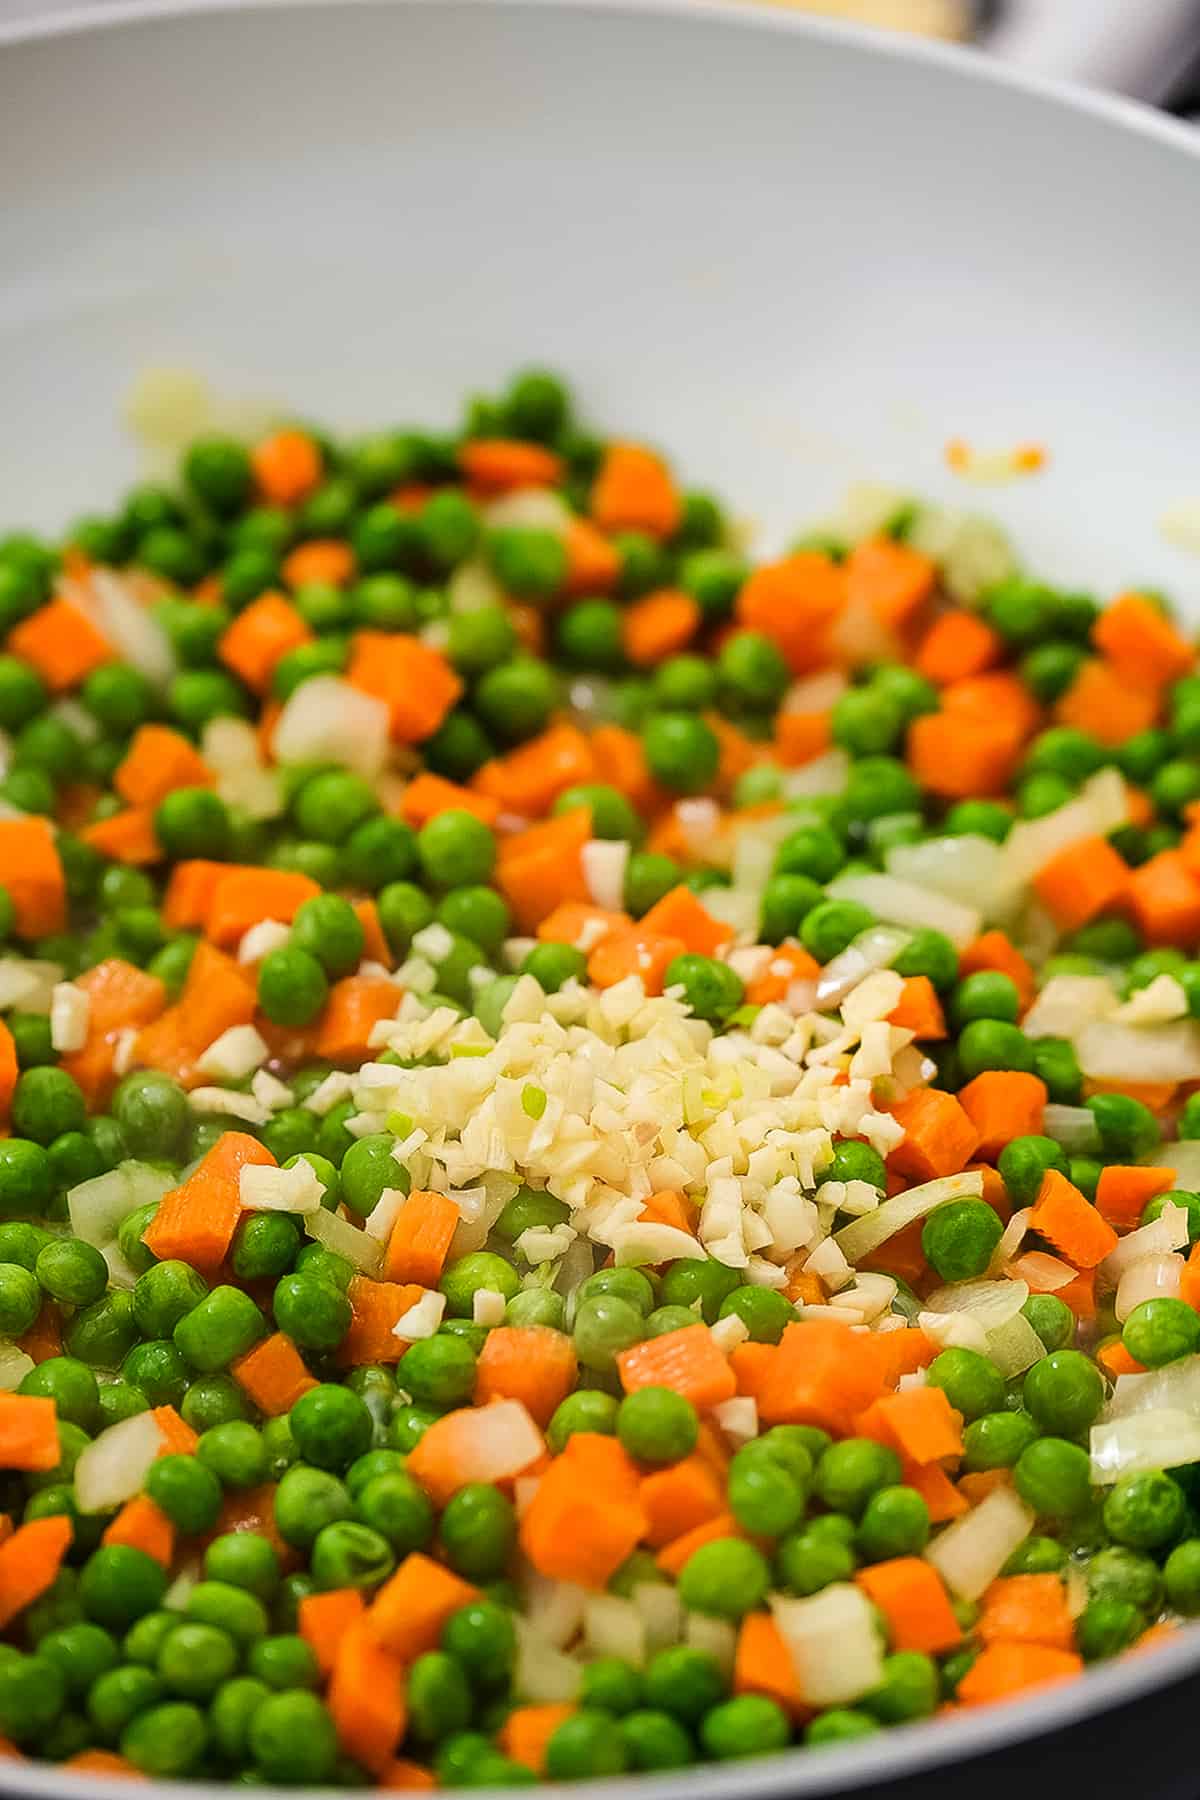 Skillet with peas, carrots, onions and garlic